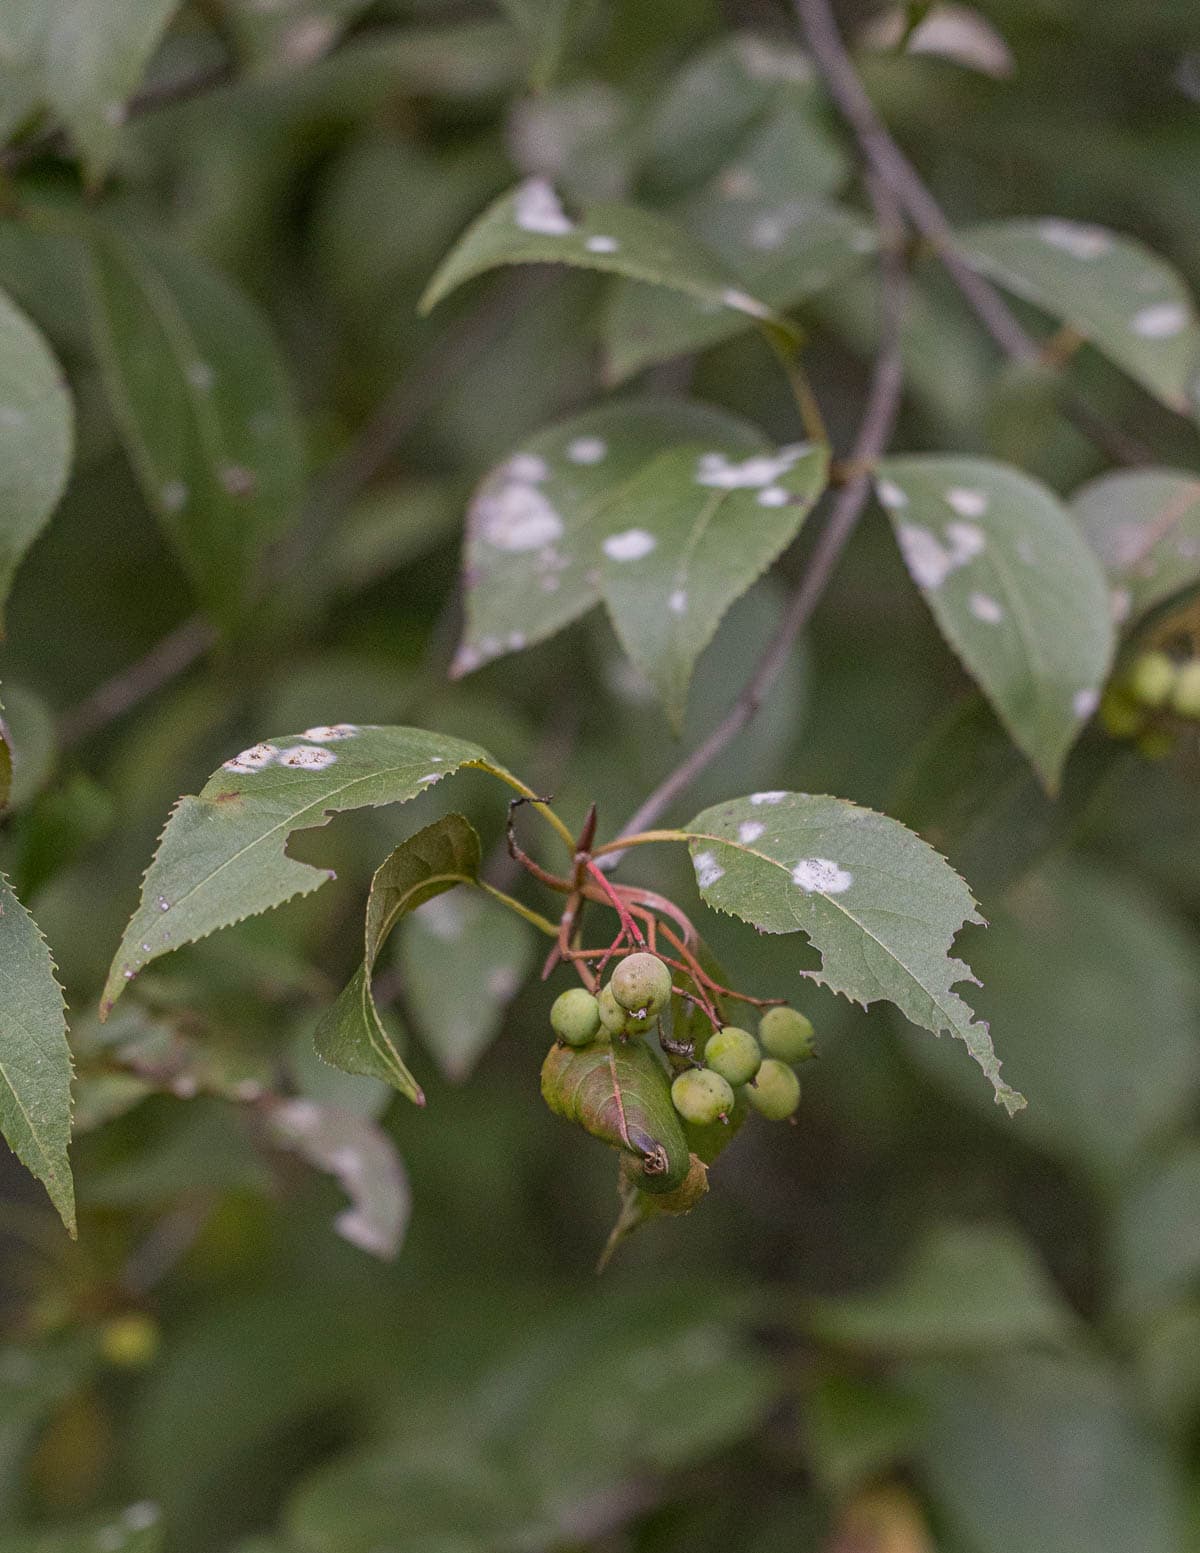 Nannyberry shrub (Viburnum lentago) showing damage from insects and powdery mildew infection.